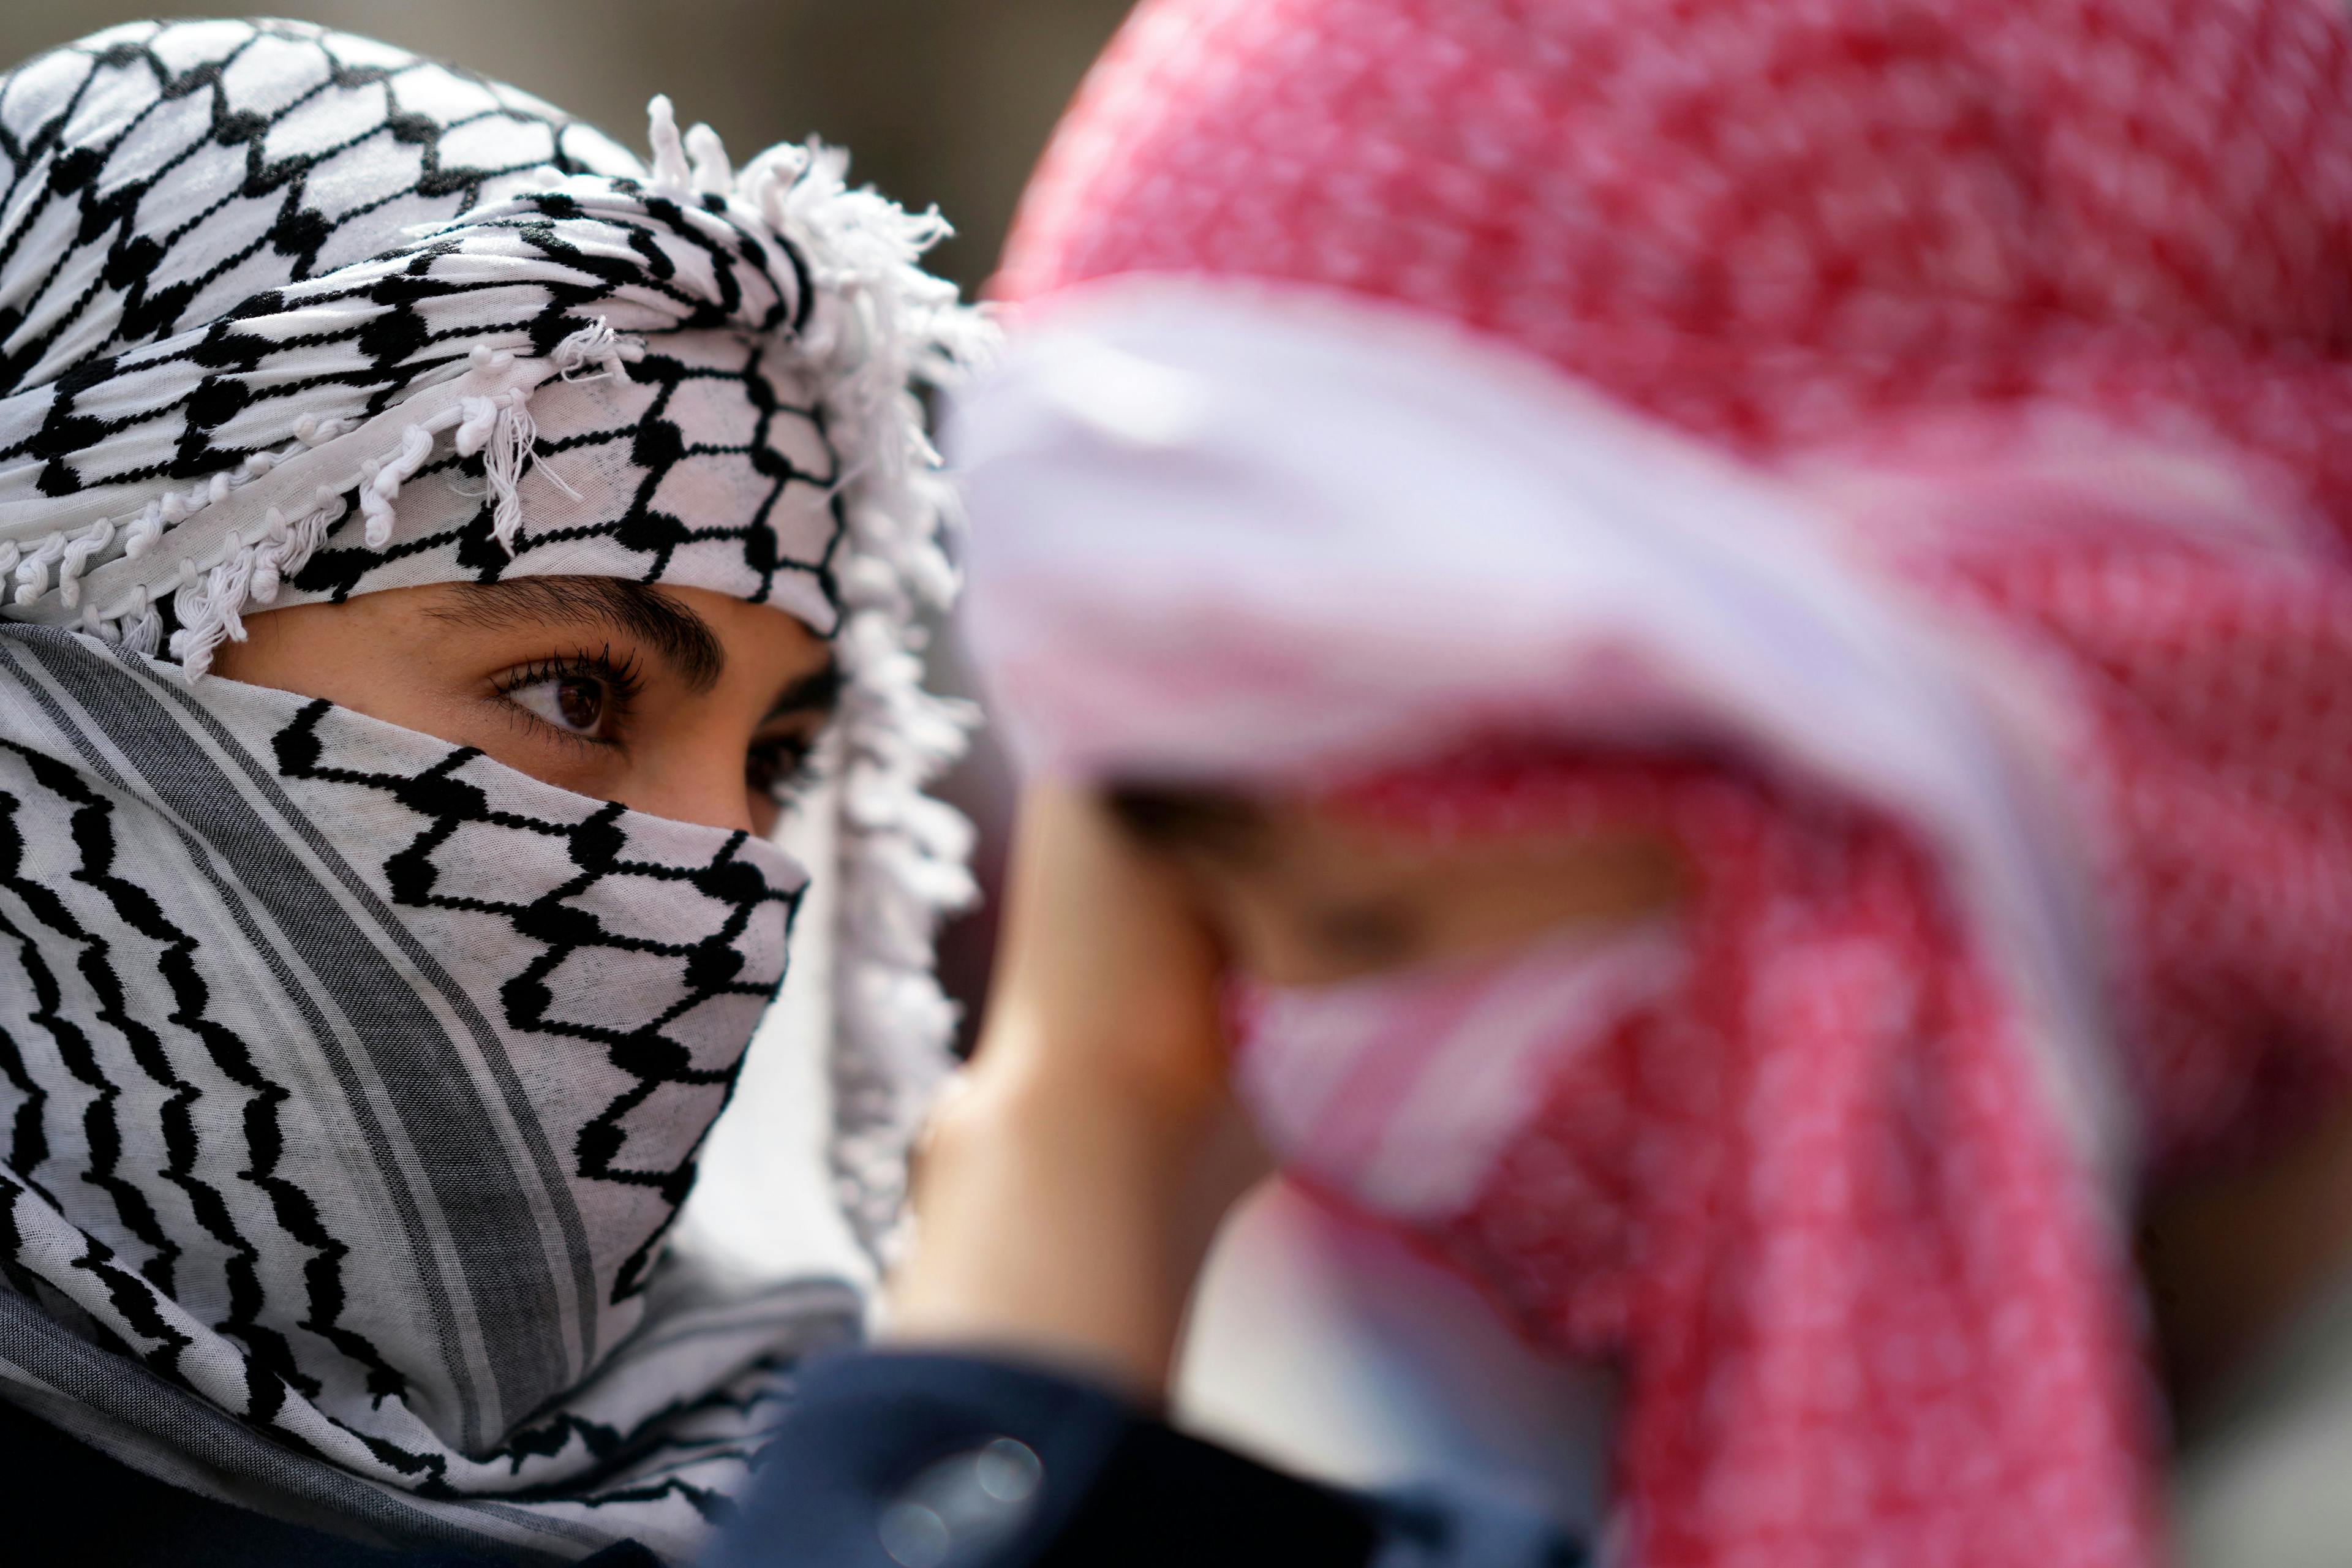 Stiles’ motion to reverse keffiyeh ban fails to win unanimous consent